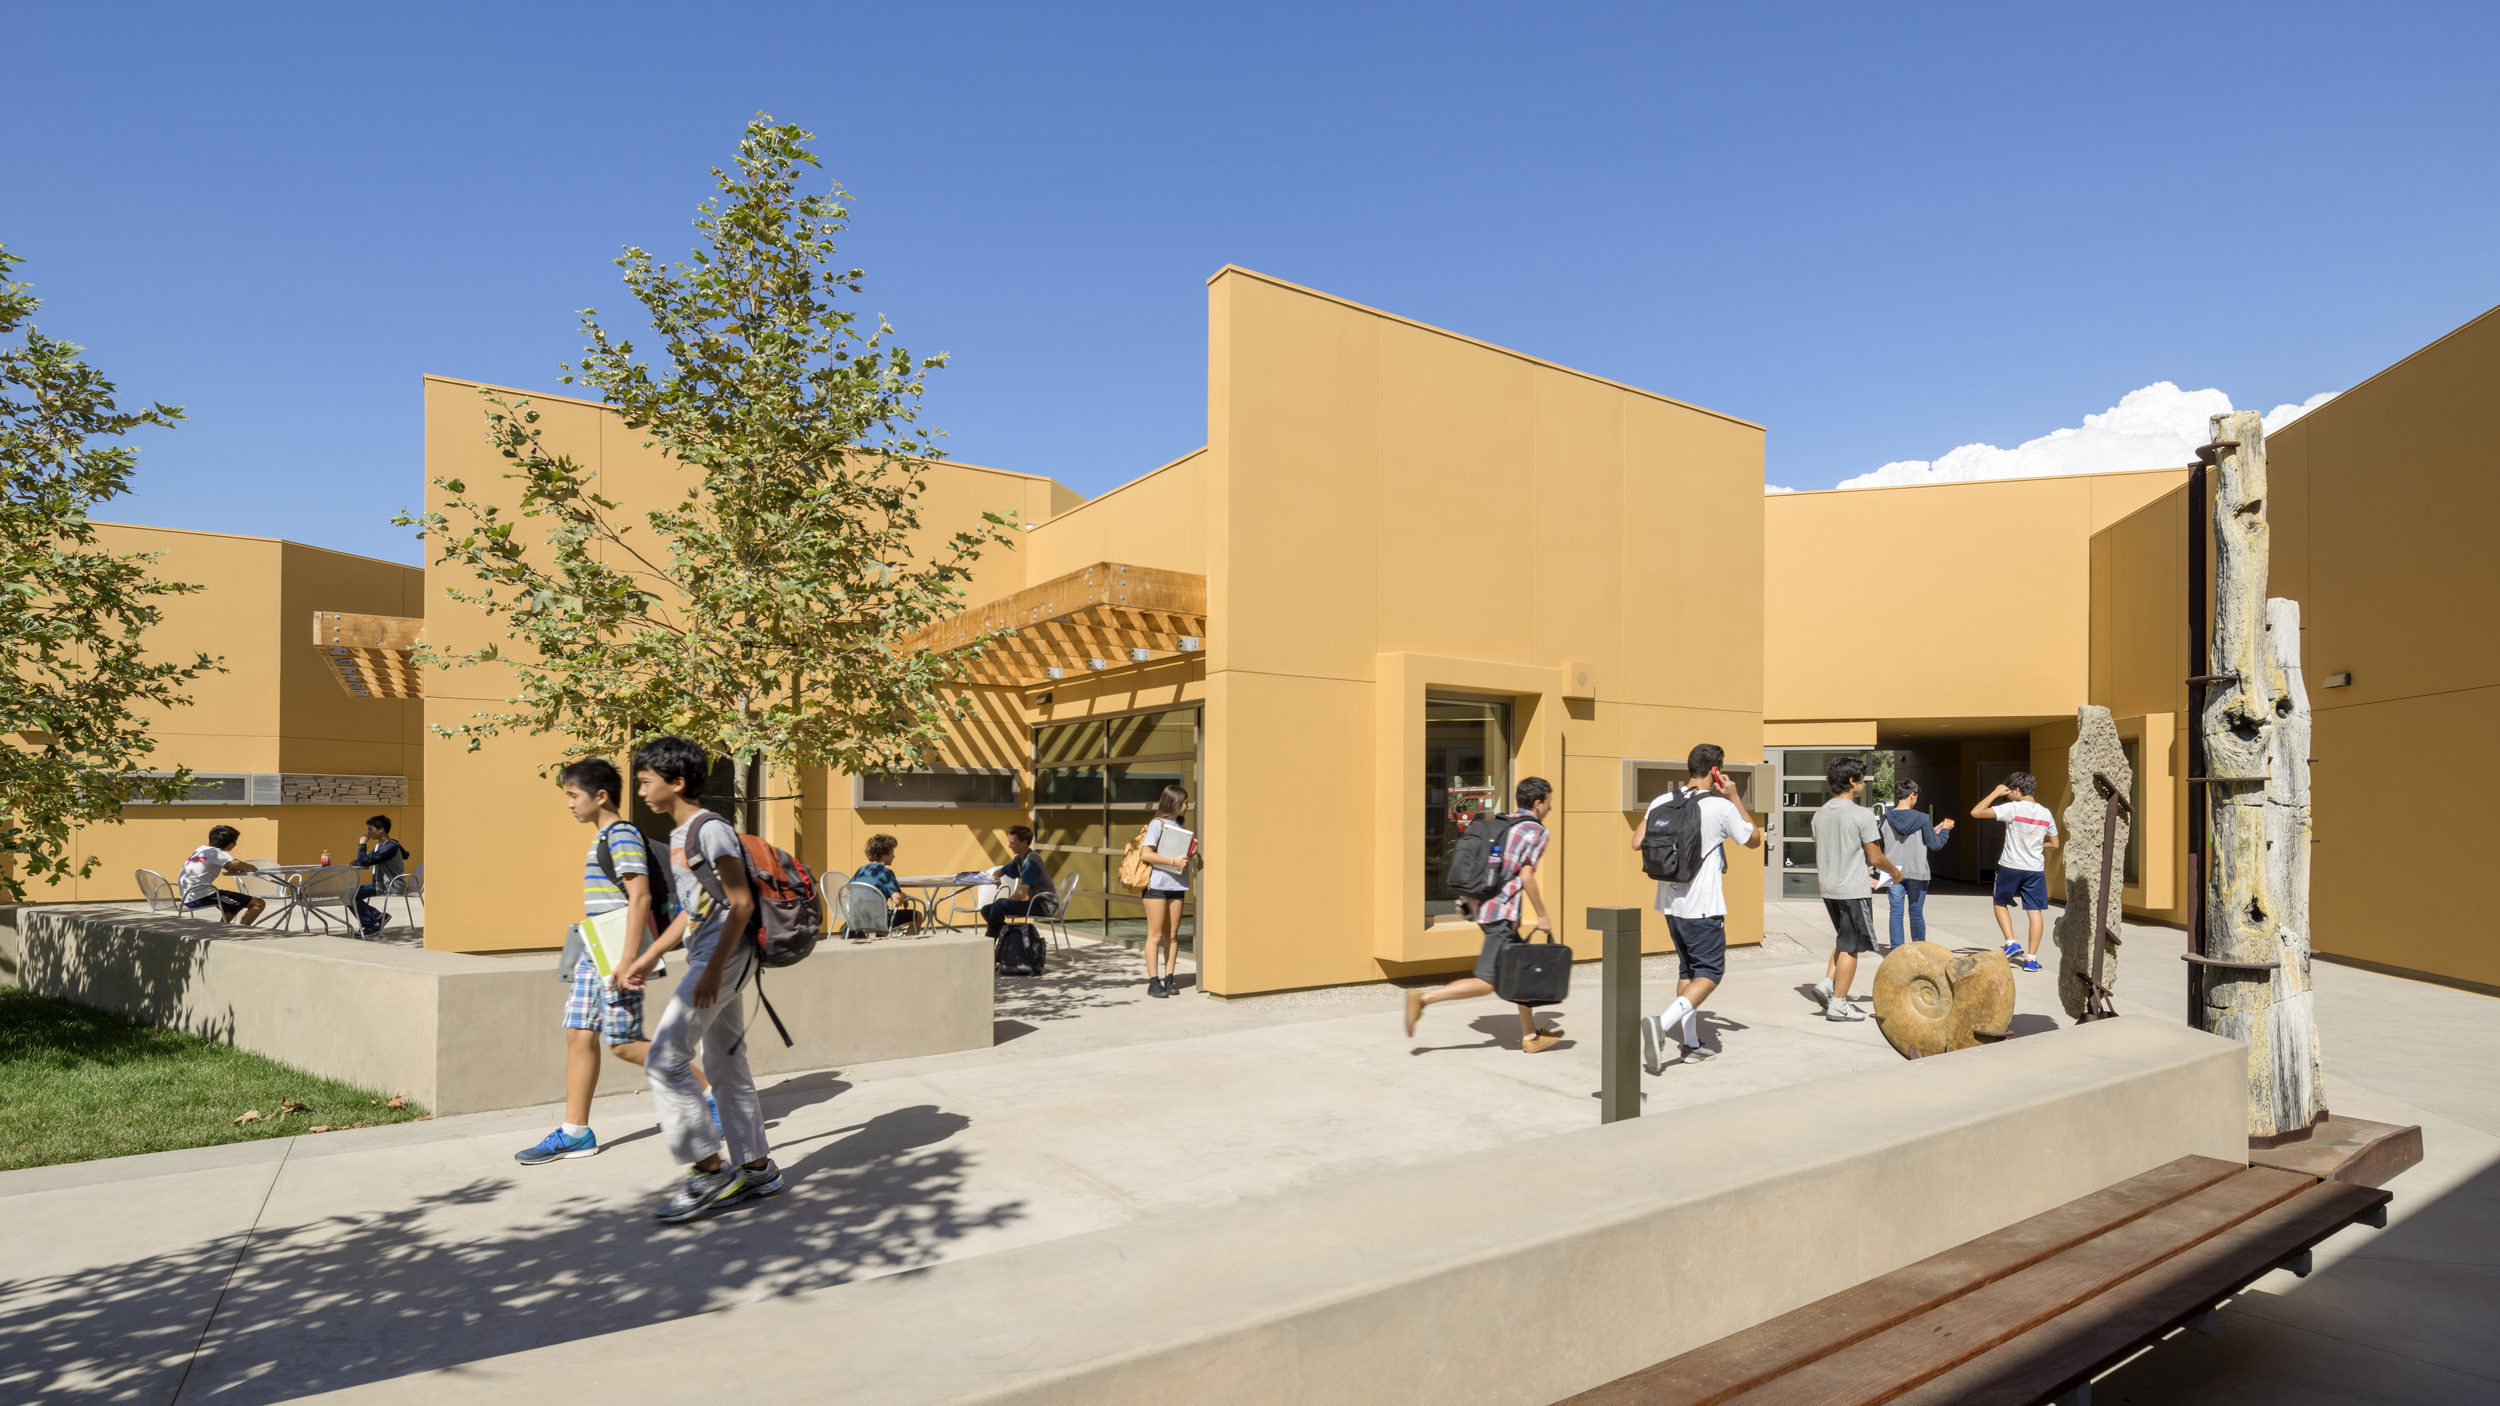 Sage Hill — Institute of the Environment and Sustainability at UCLA